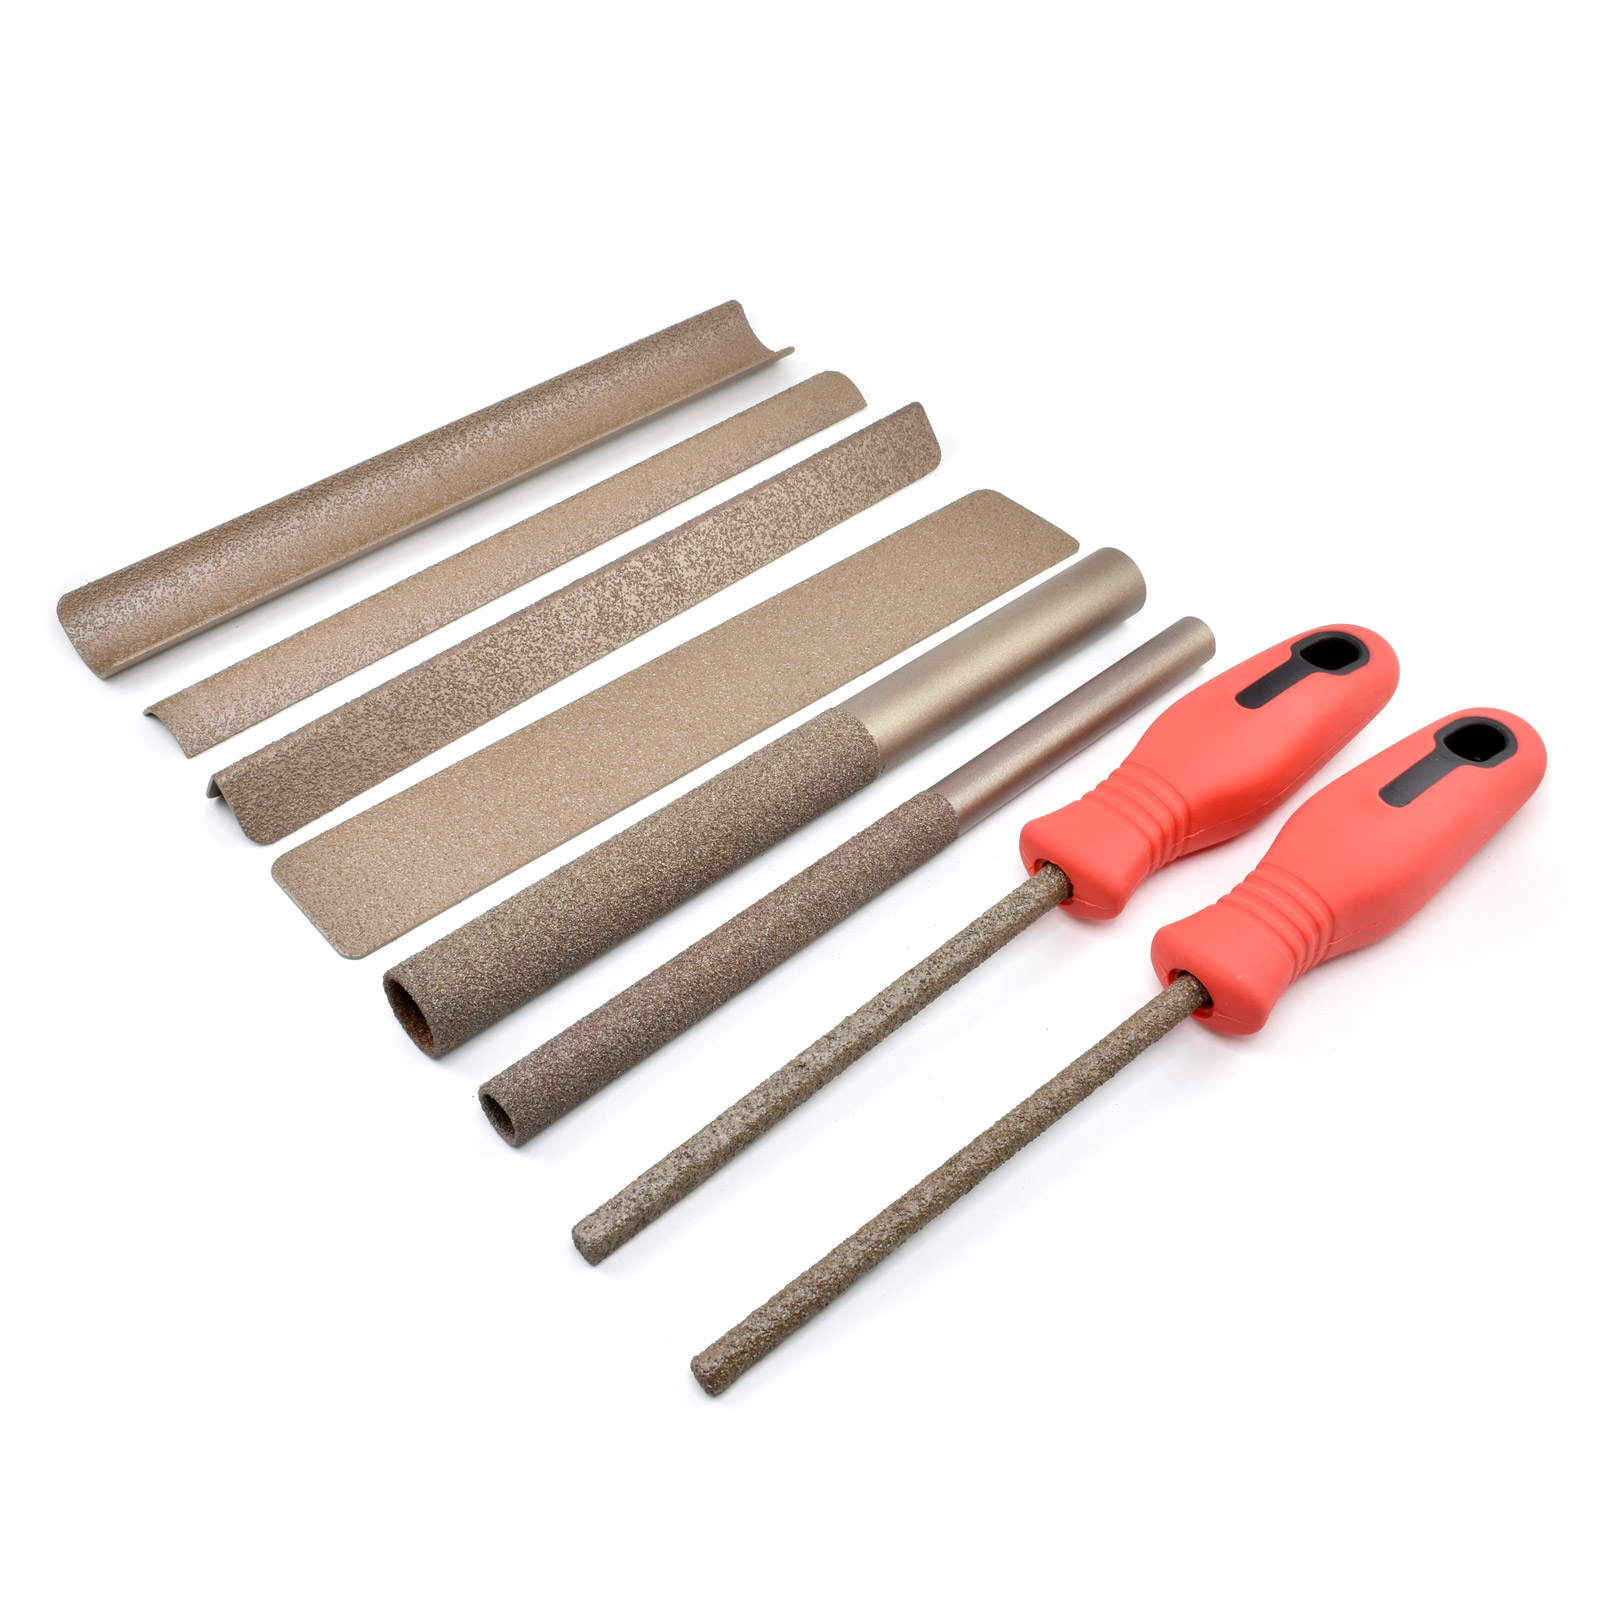 SDAE 8 Inch Heavy Duty File Set 8in 3pcs High Carbon Hardened Steel Files with Anti-Slip Handles Suitable for for Wood/Metal/Model/Shaping Medium Coarse